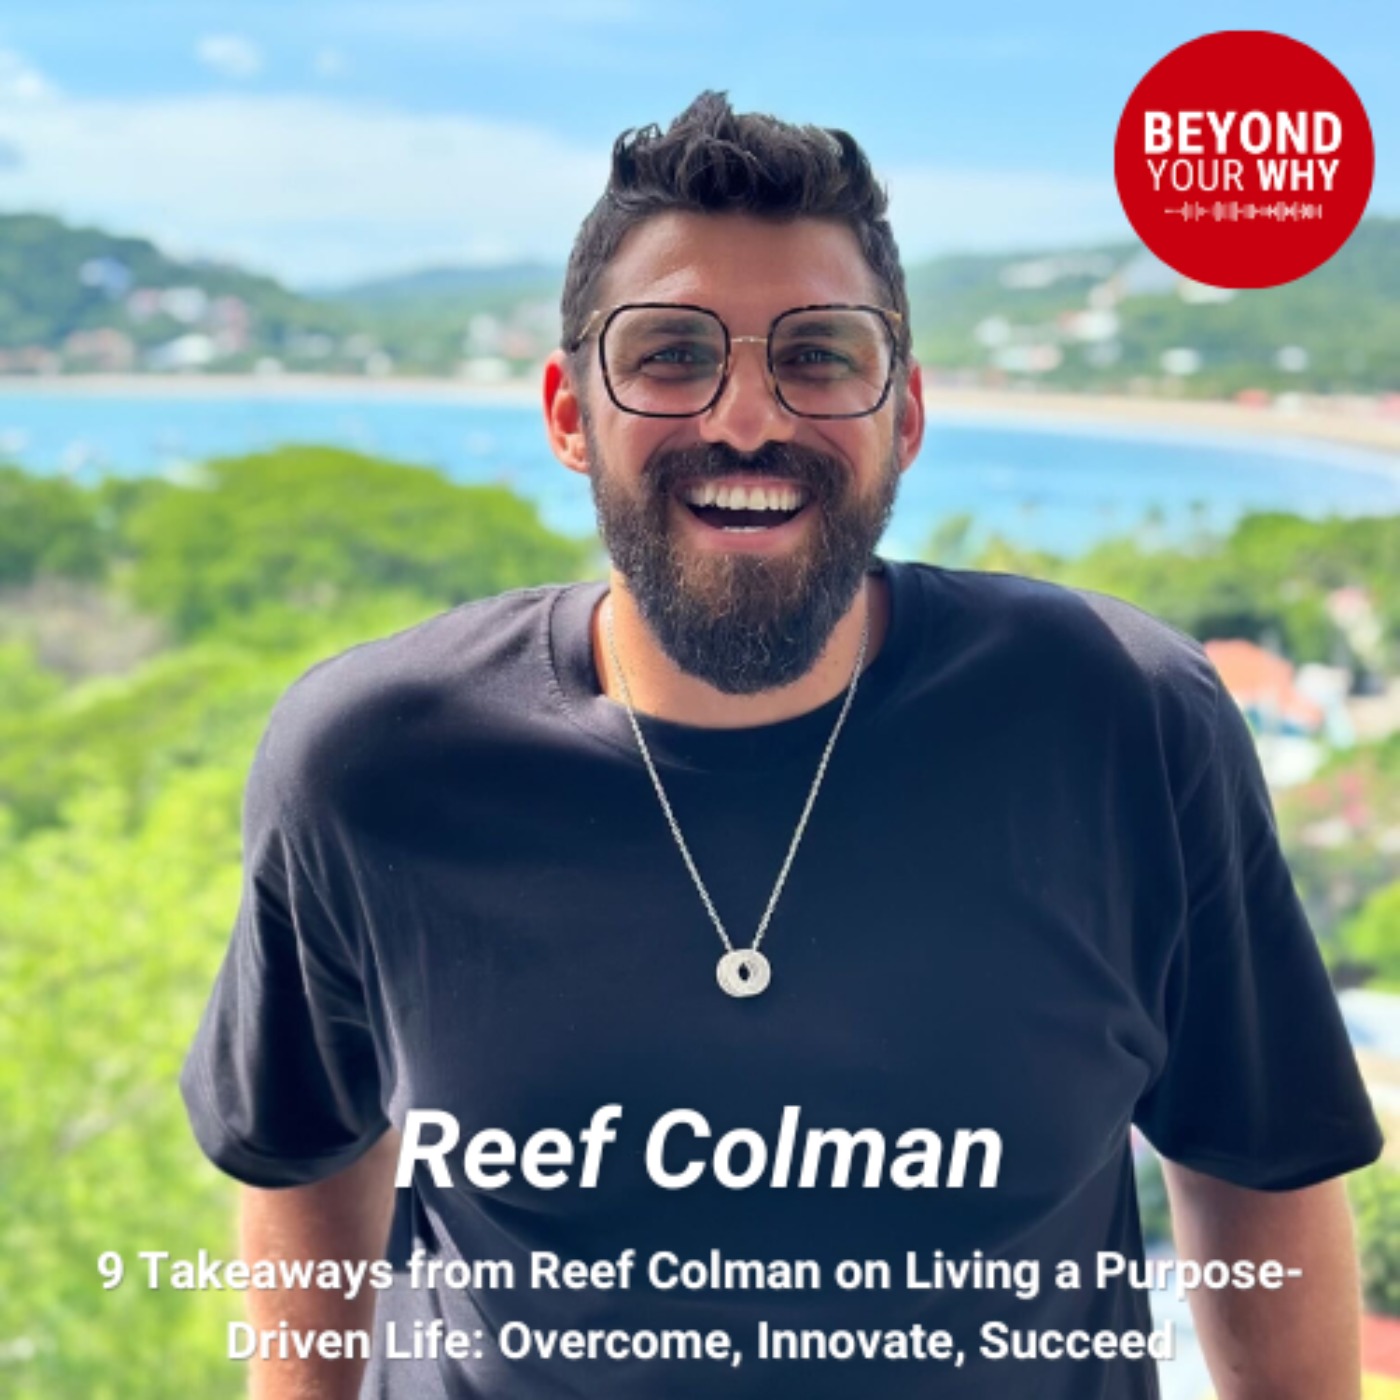 9 Takeaways from Reef Colman on Living a Purpose-Driven Life: Overcome, Innovate, Succeed